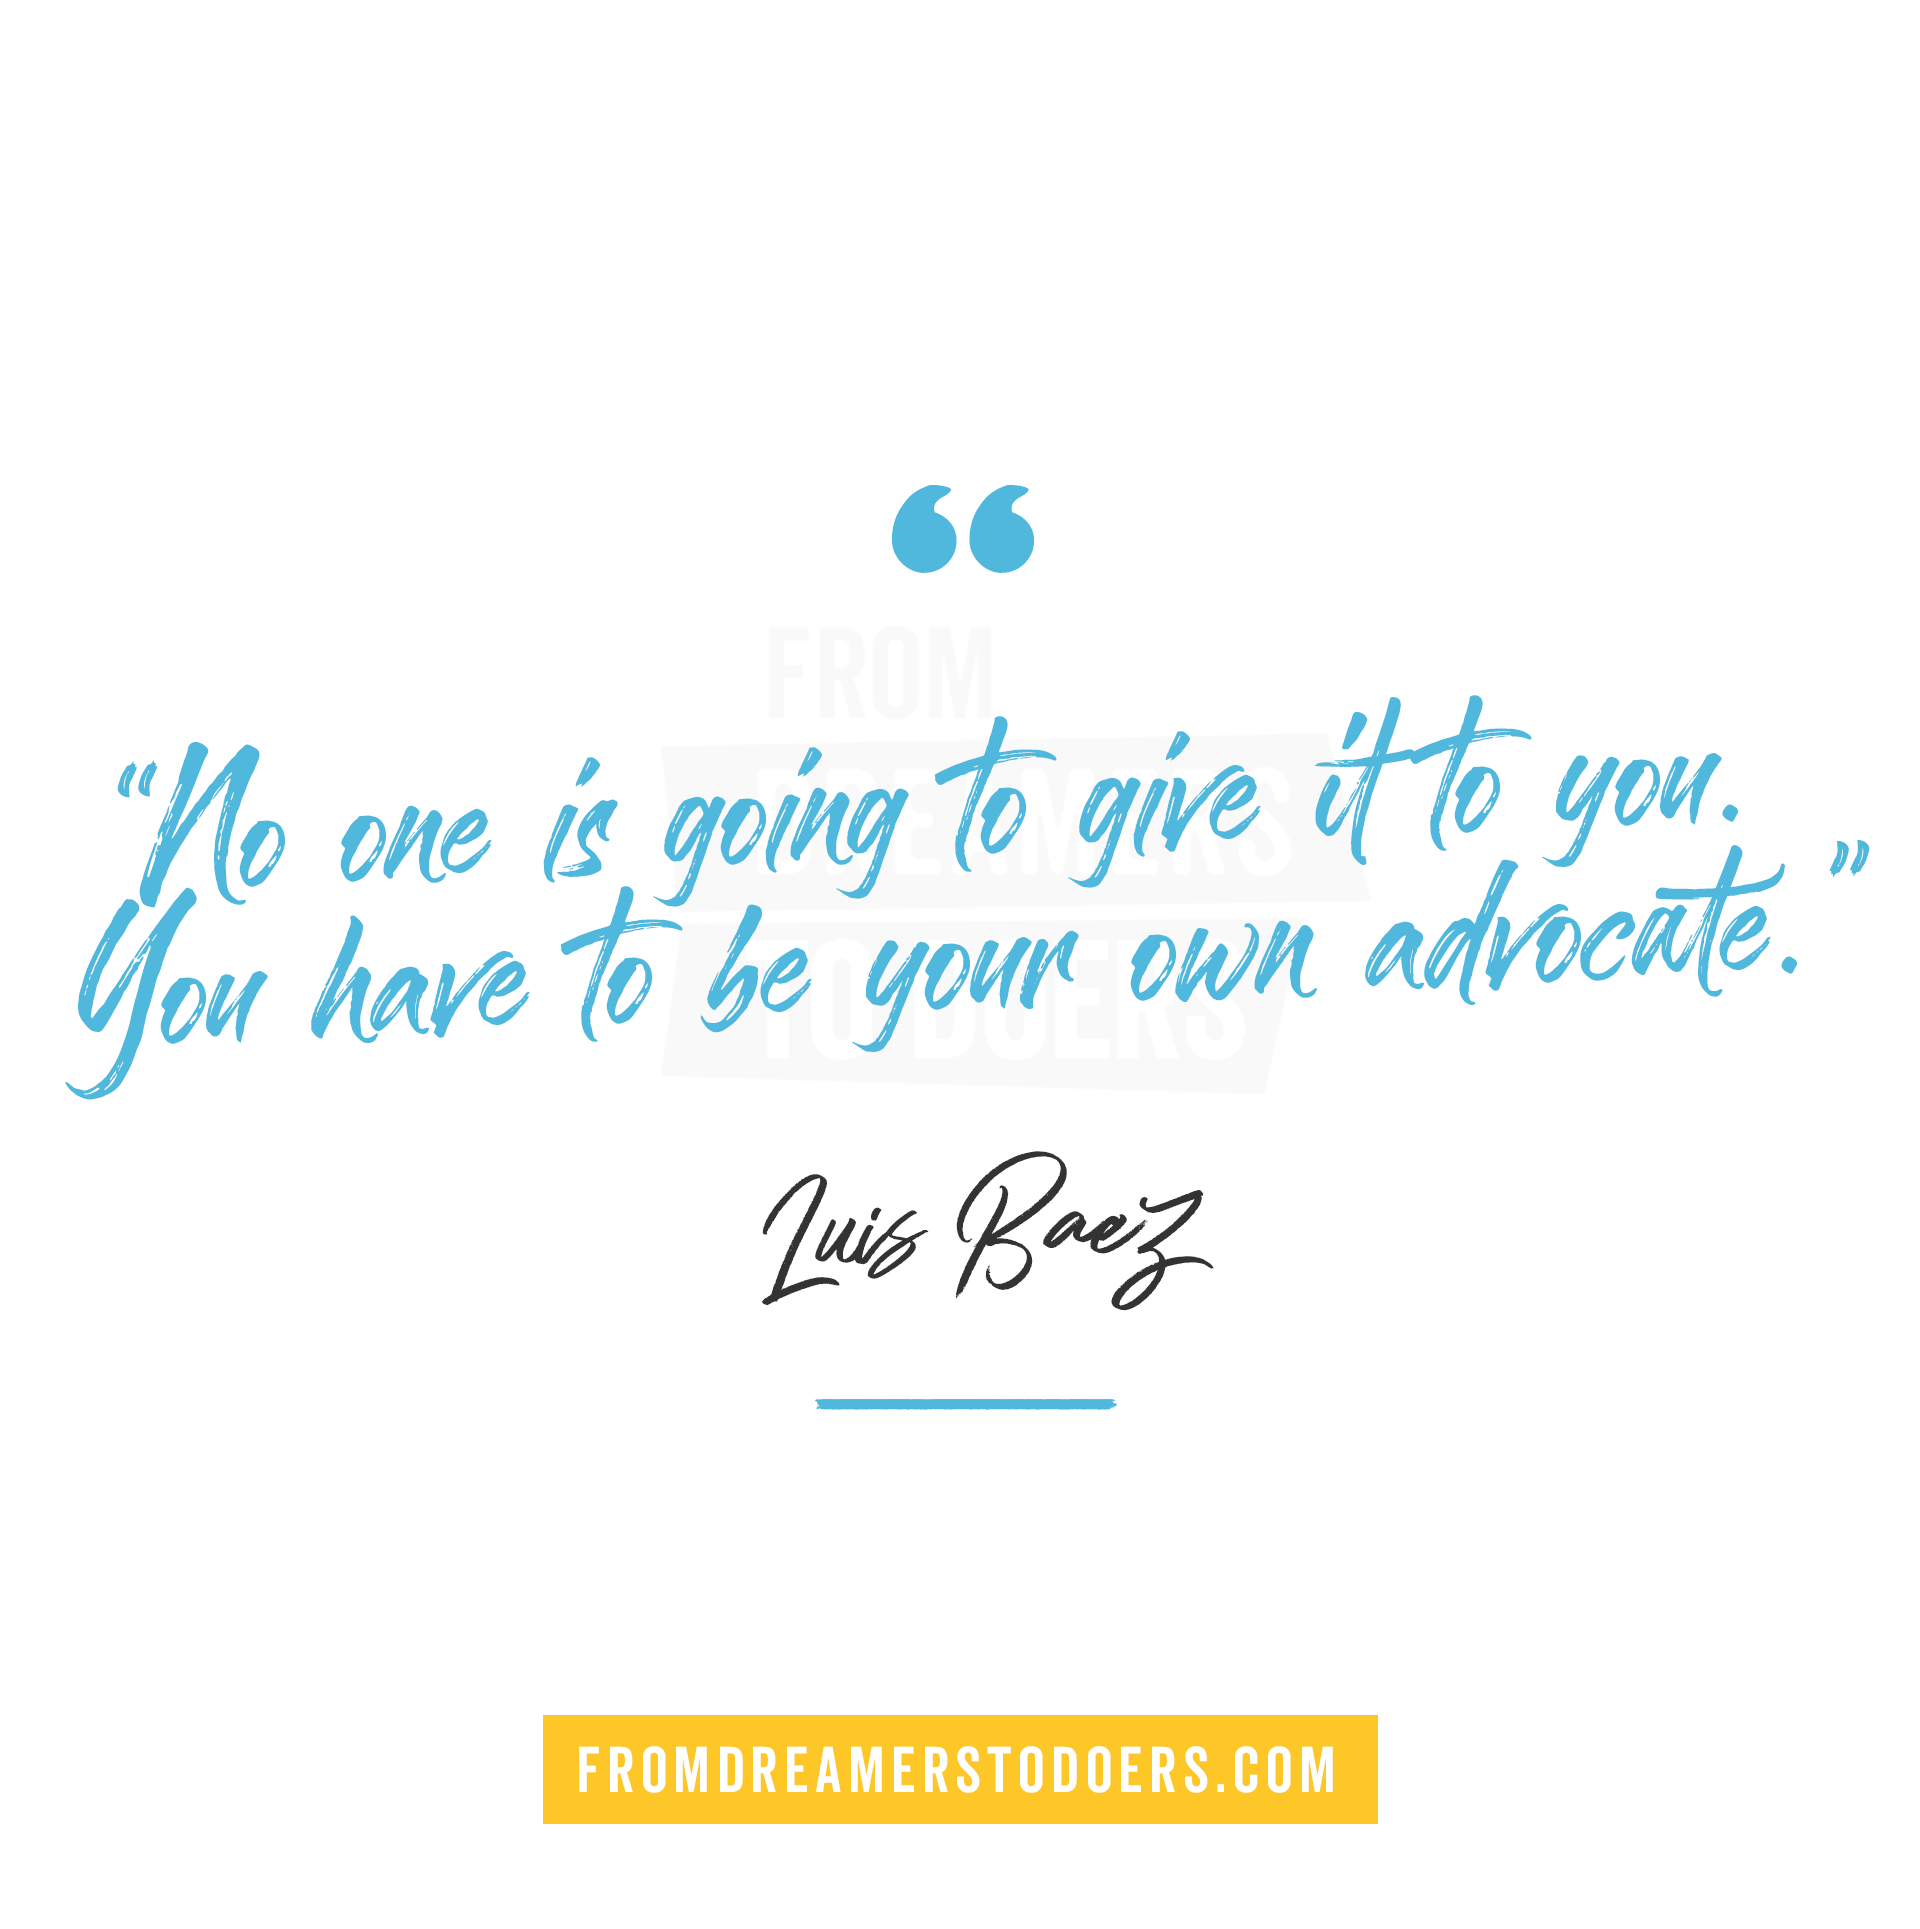 "No one is going to give it to you. You have to be your own advocate." - Luis Baez. From Dreamers to Doers podcast. 